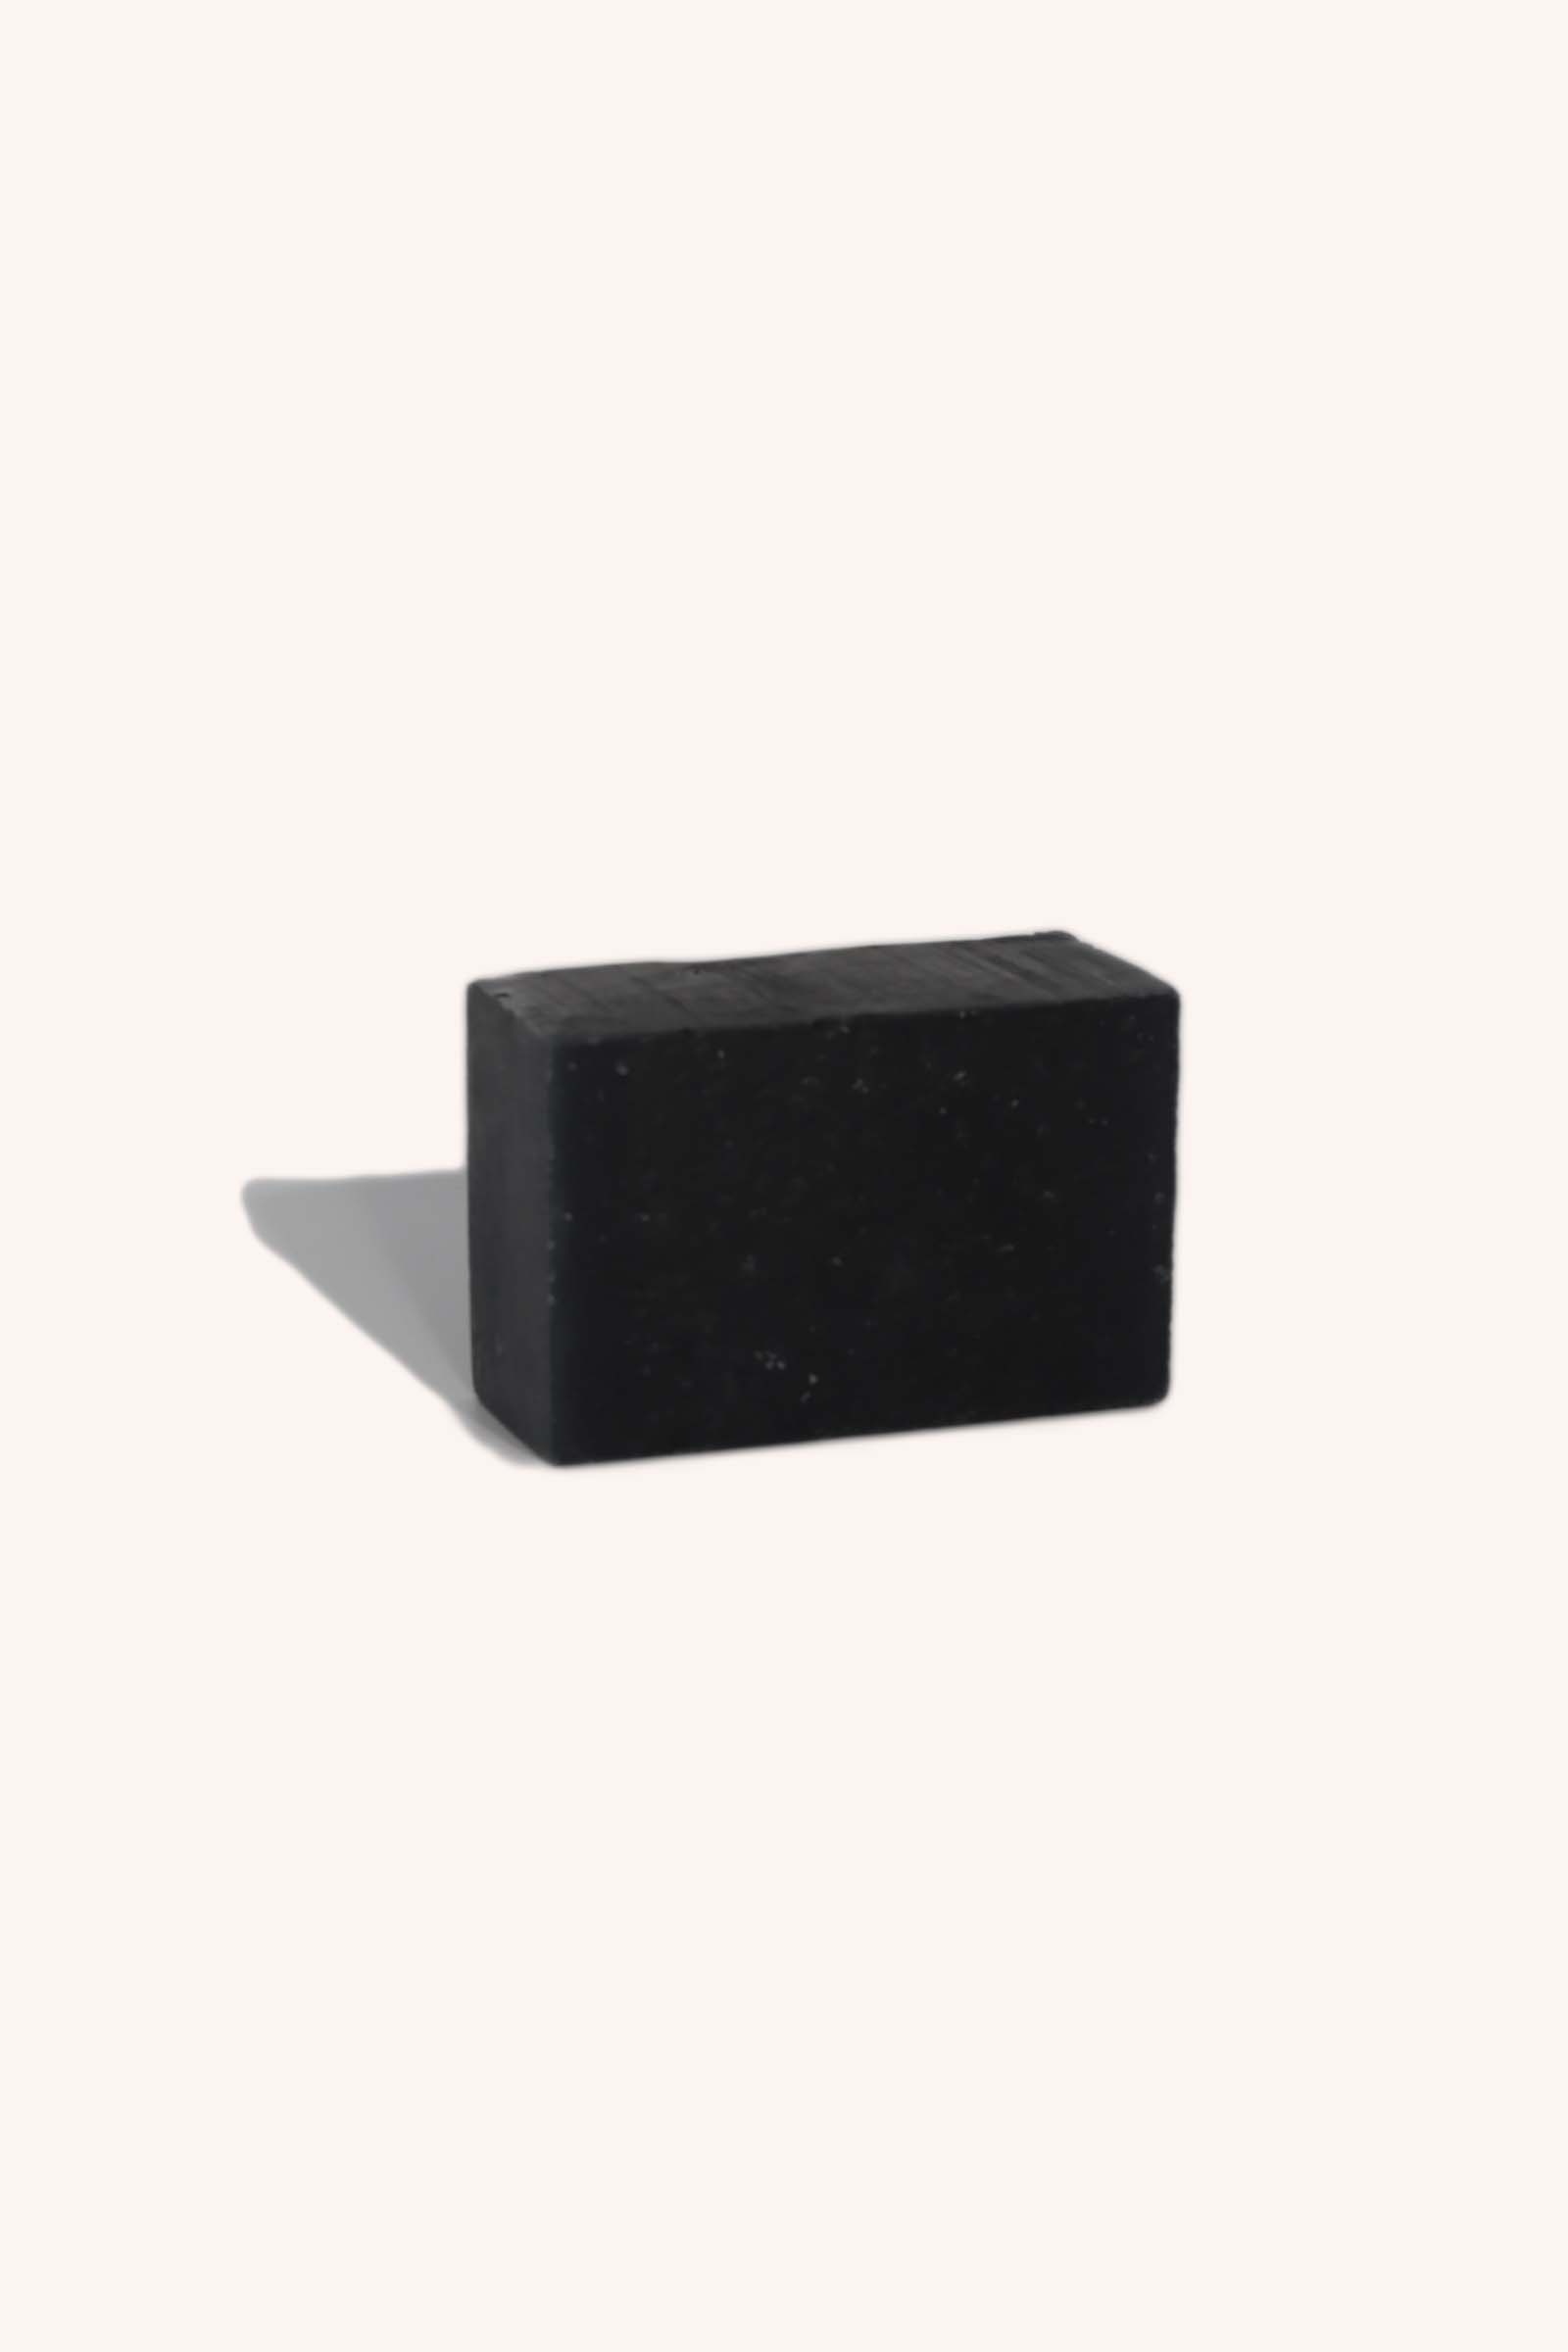 Charcoal Bar by Oasis Botanicals LLP | Get it at The Green Collective